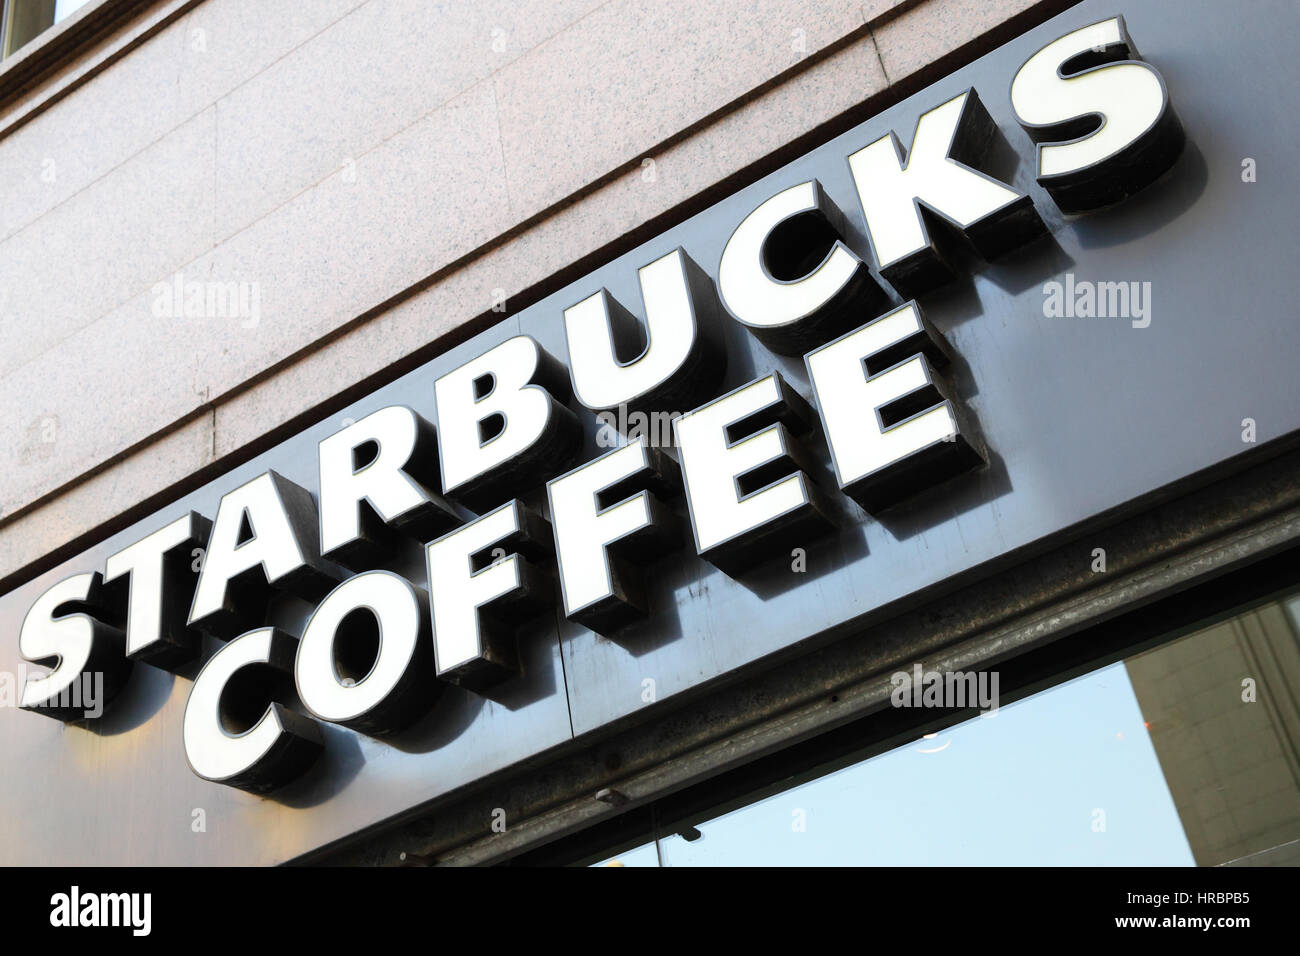 MADRID, SPAIN - September 06, 2016: Starbucks coffee shop sign close-up. Starbucks is the largest coffeehouse in the world Stock Photo